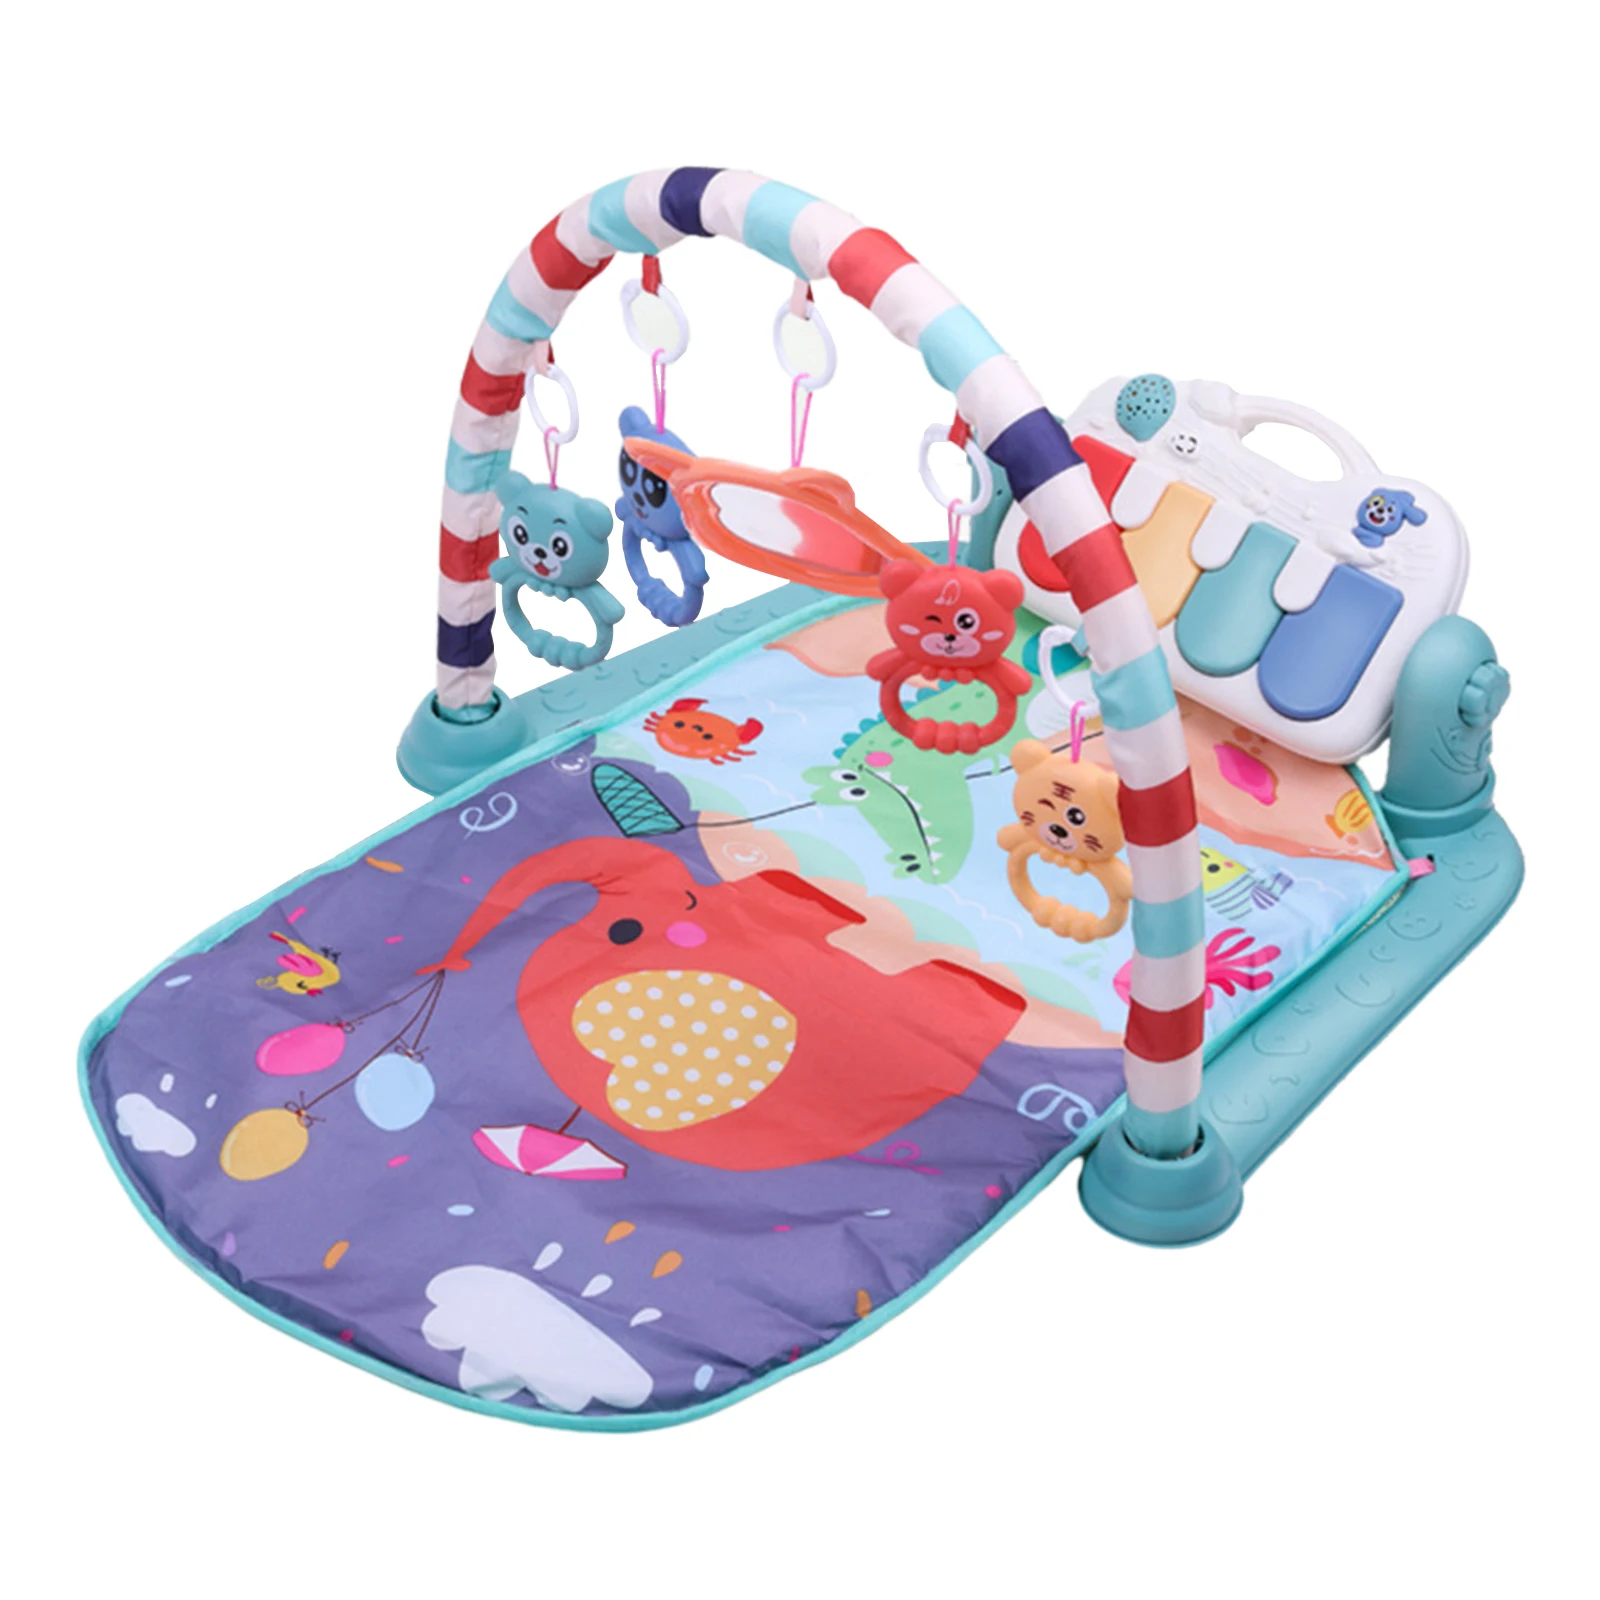 Baby Gym Play Mat with Sound and Music Activity Rug Toys Music Play Mat Activity Gym for Newborns Toddlers